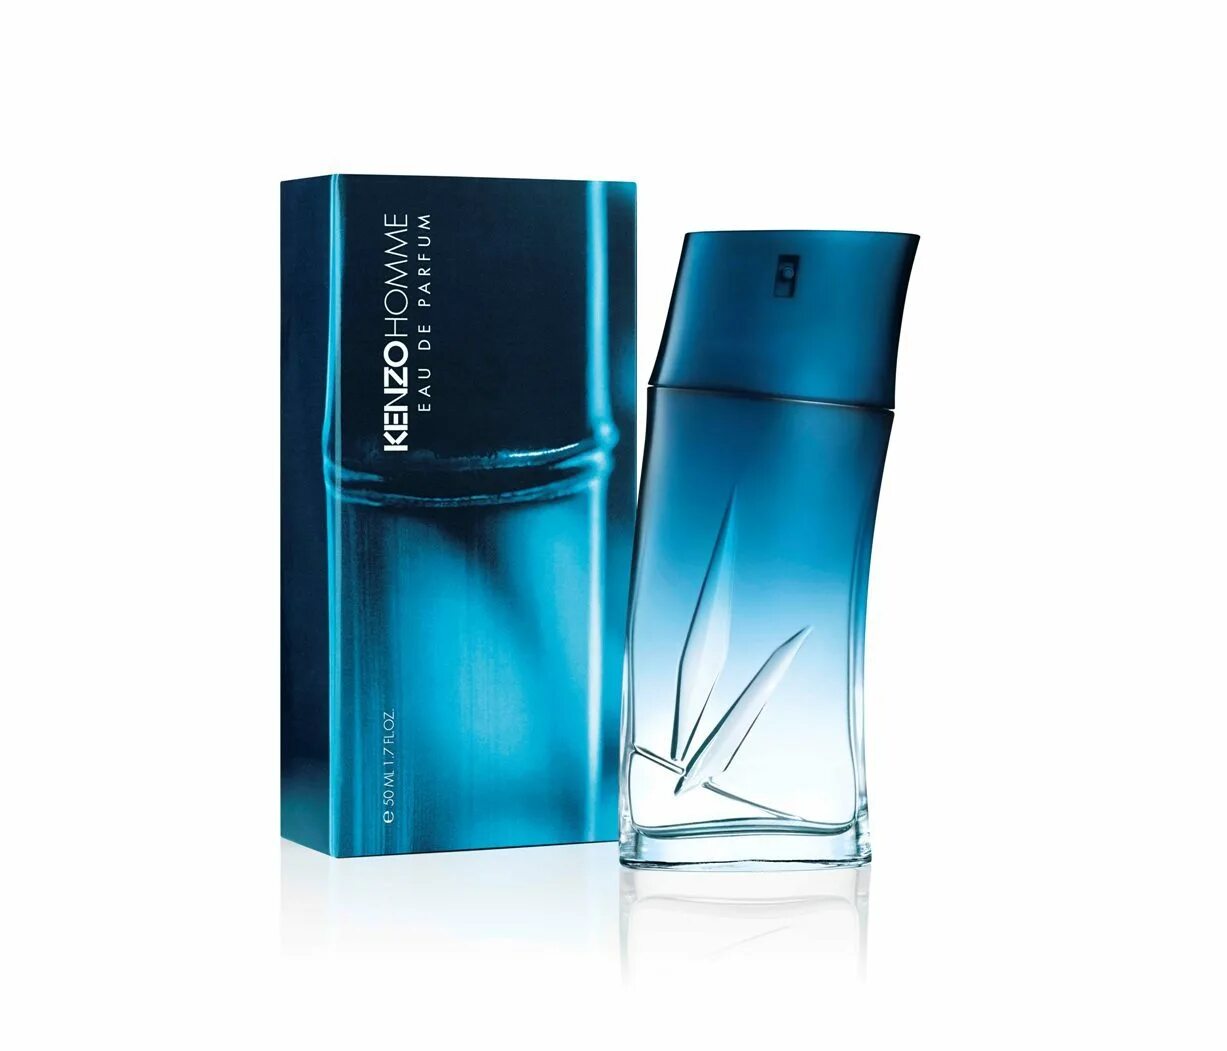 Kenzo Aqua Kenzo pour homme m 100ml. Kenzo homme парфюмерная вода 100 мл. Кензо pour homme мужские. Кензо туалетная вода для мужчин pour homme. Pour homme для мужчин